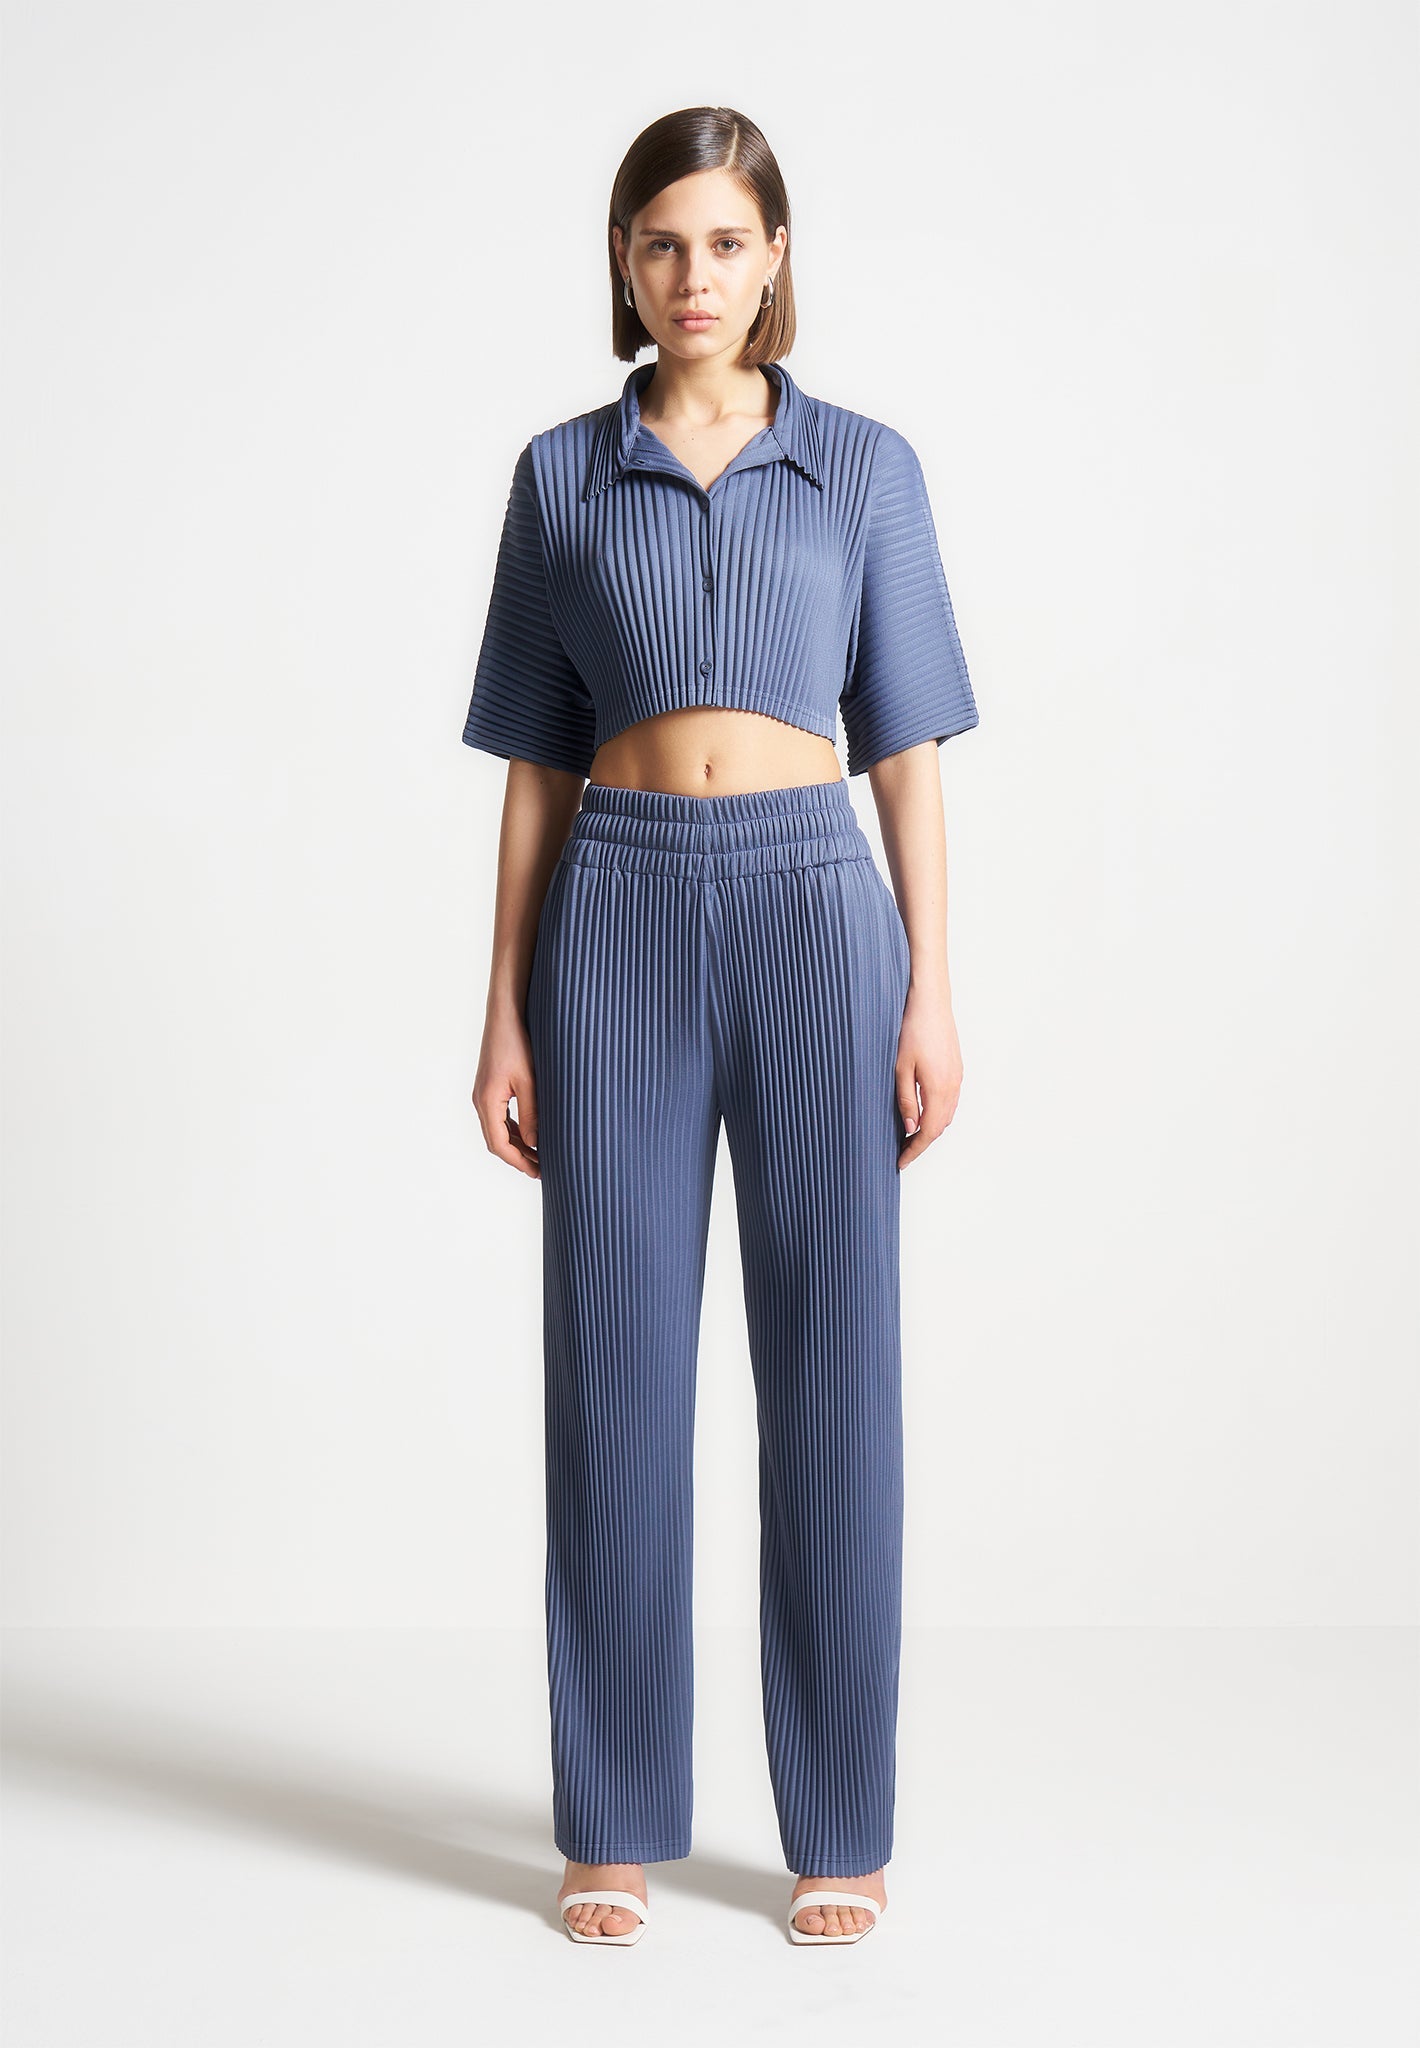 pleated-cropped-shirt-steel-blue-1